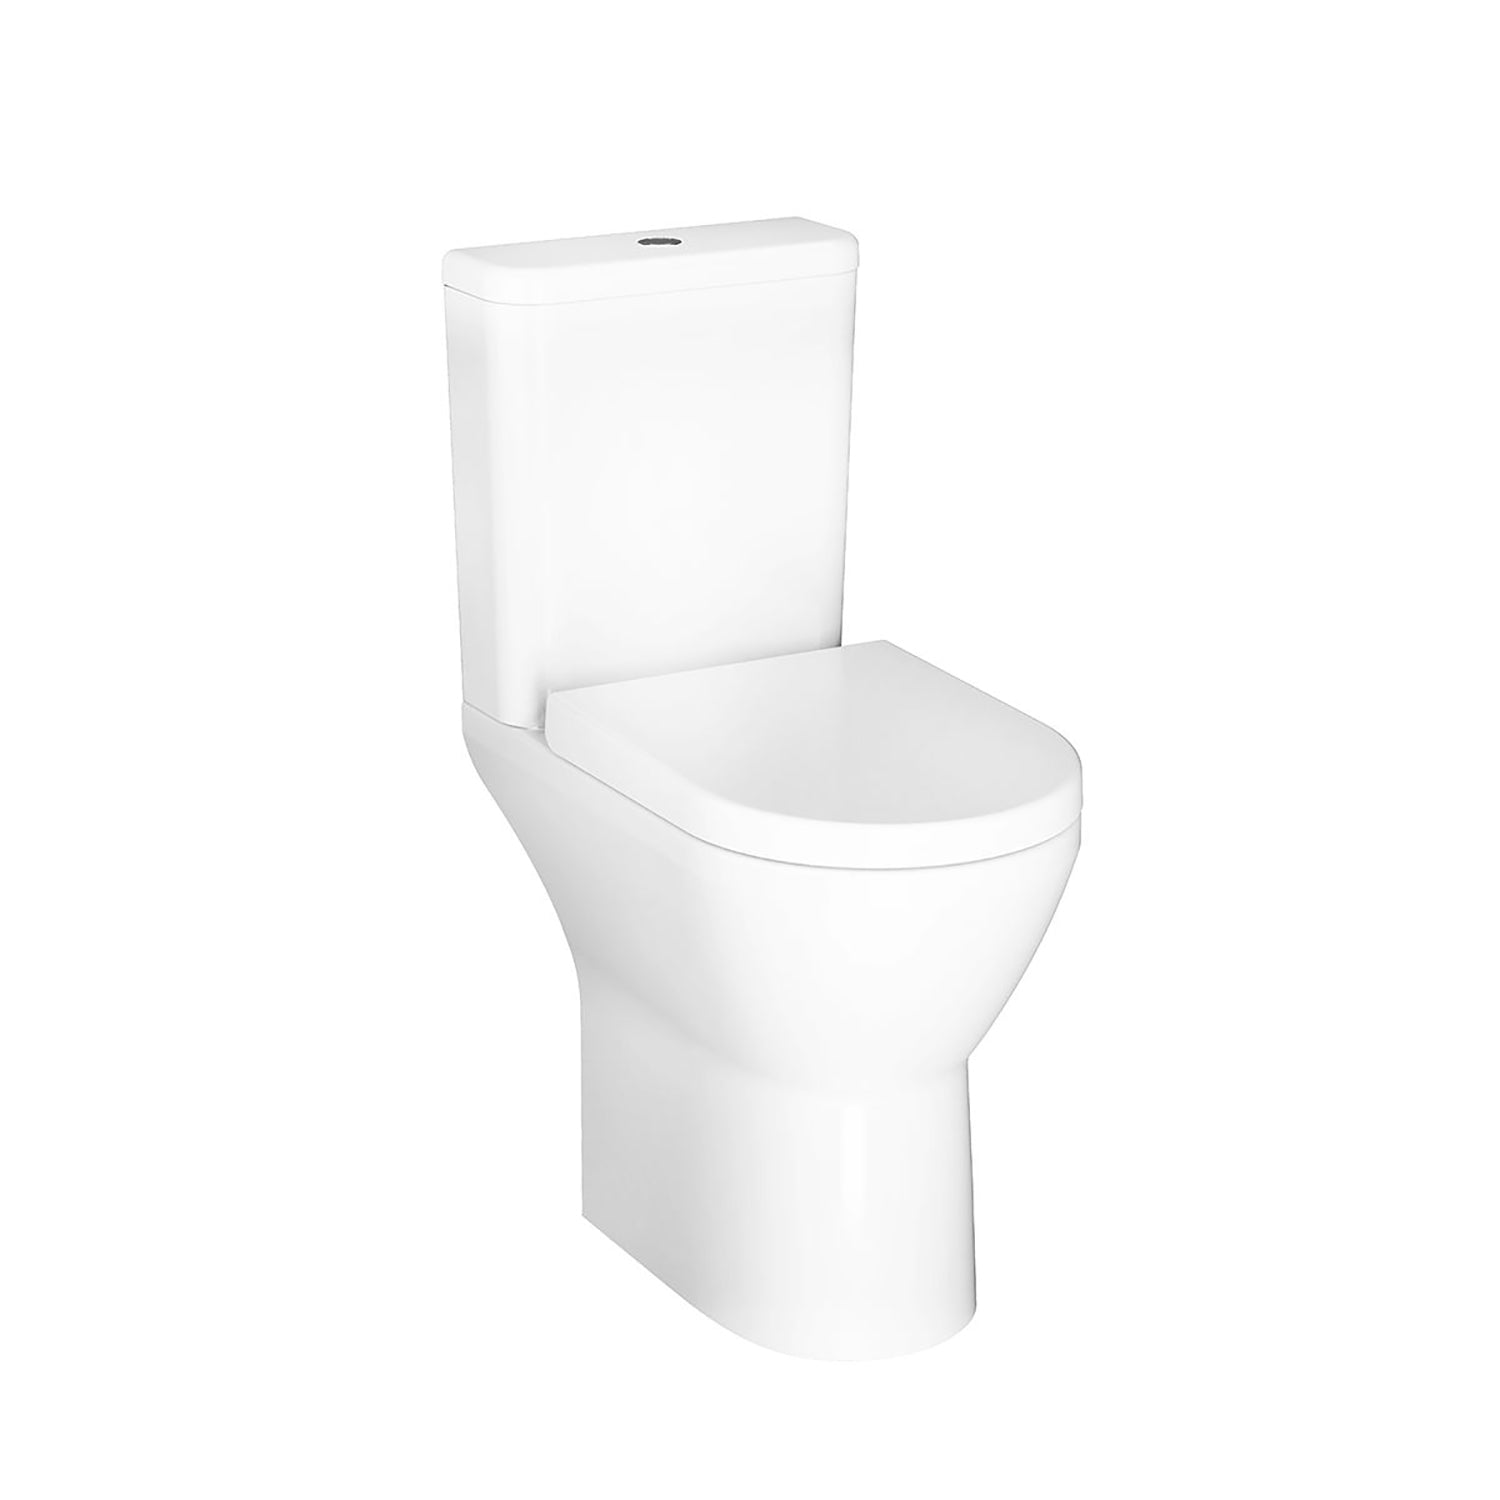 Vesta comfort height close coupled toilet in a white finish, 500mm with seat, cover and cistern included on a white background.